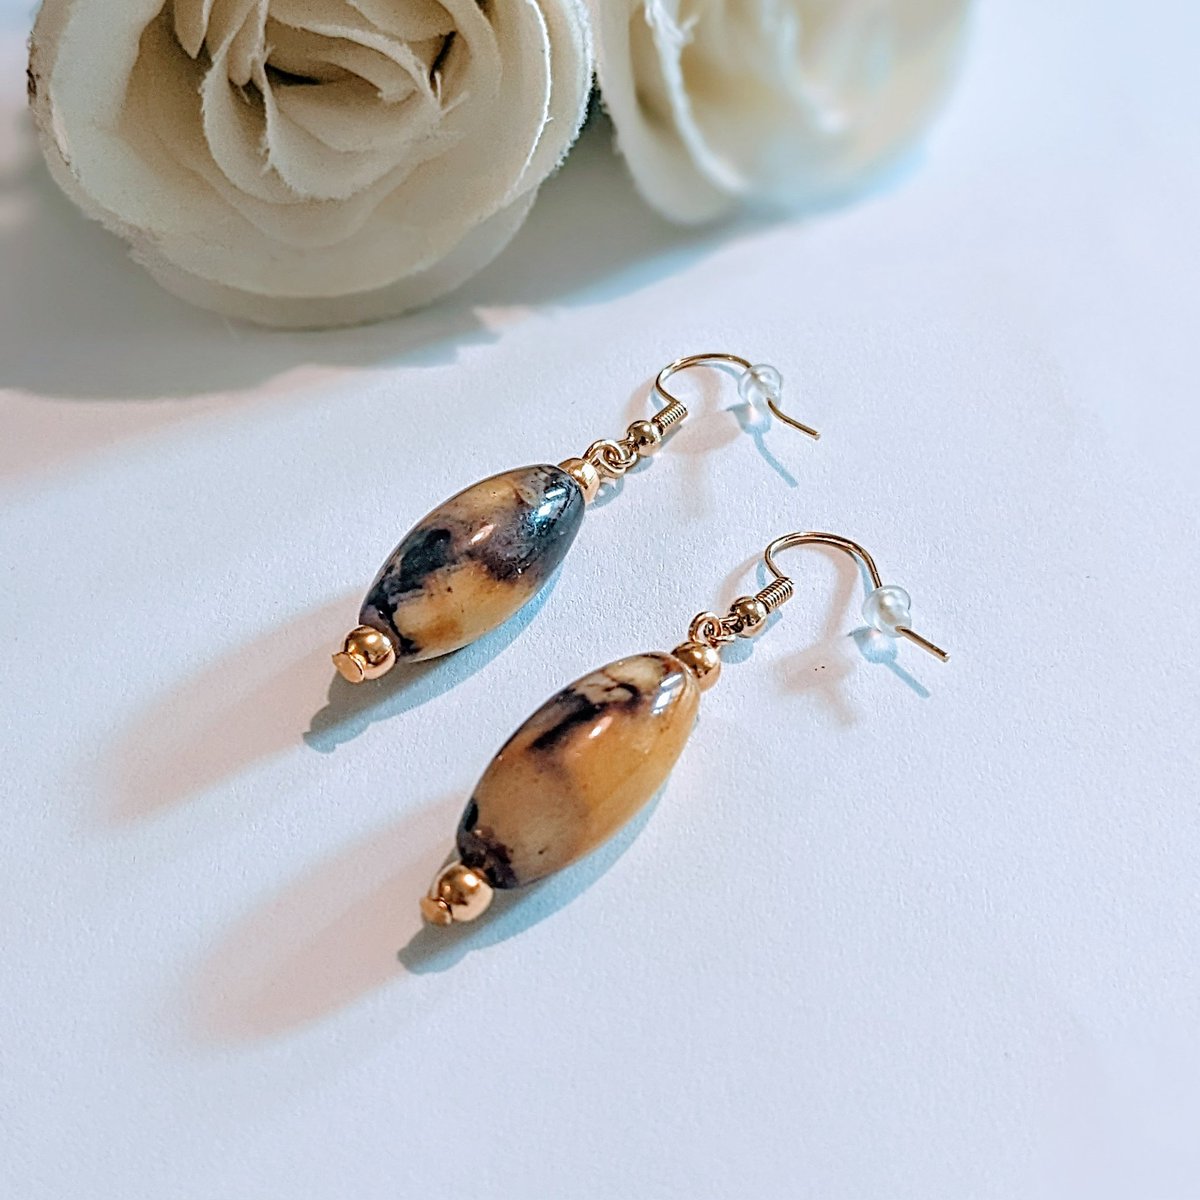 #handmade Yellow marble glass beaded dangle earrings.
18k gold filled.
Other colour options.
Available here ⬇️ 
kelliesuedesigns.etsy.com/listing/126353…
.
#EarlyBiz #EarlyRisers #jewelryaddict #etsy #MHHSBD #giftideas #stockingstuffers #shopping #elevenseshour